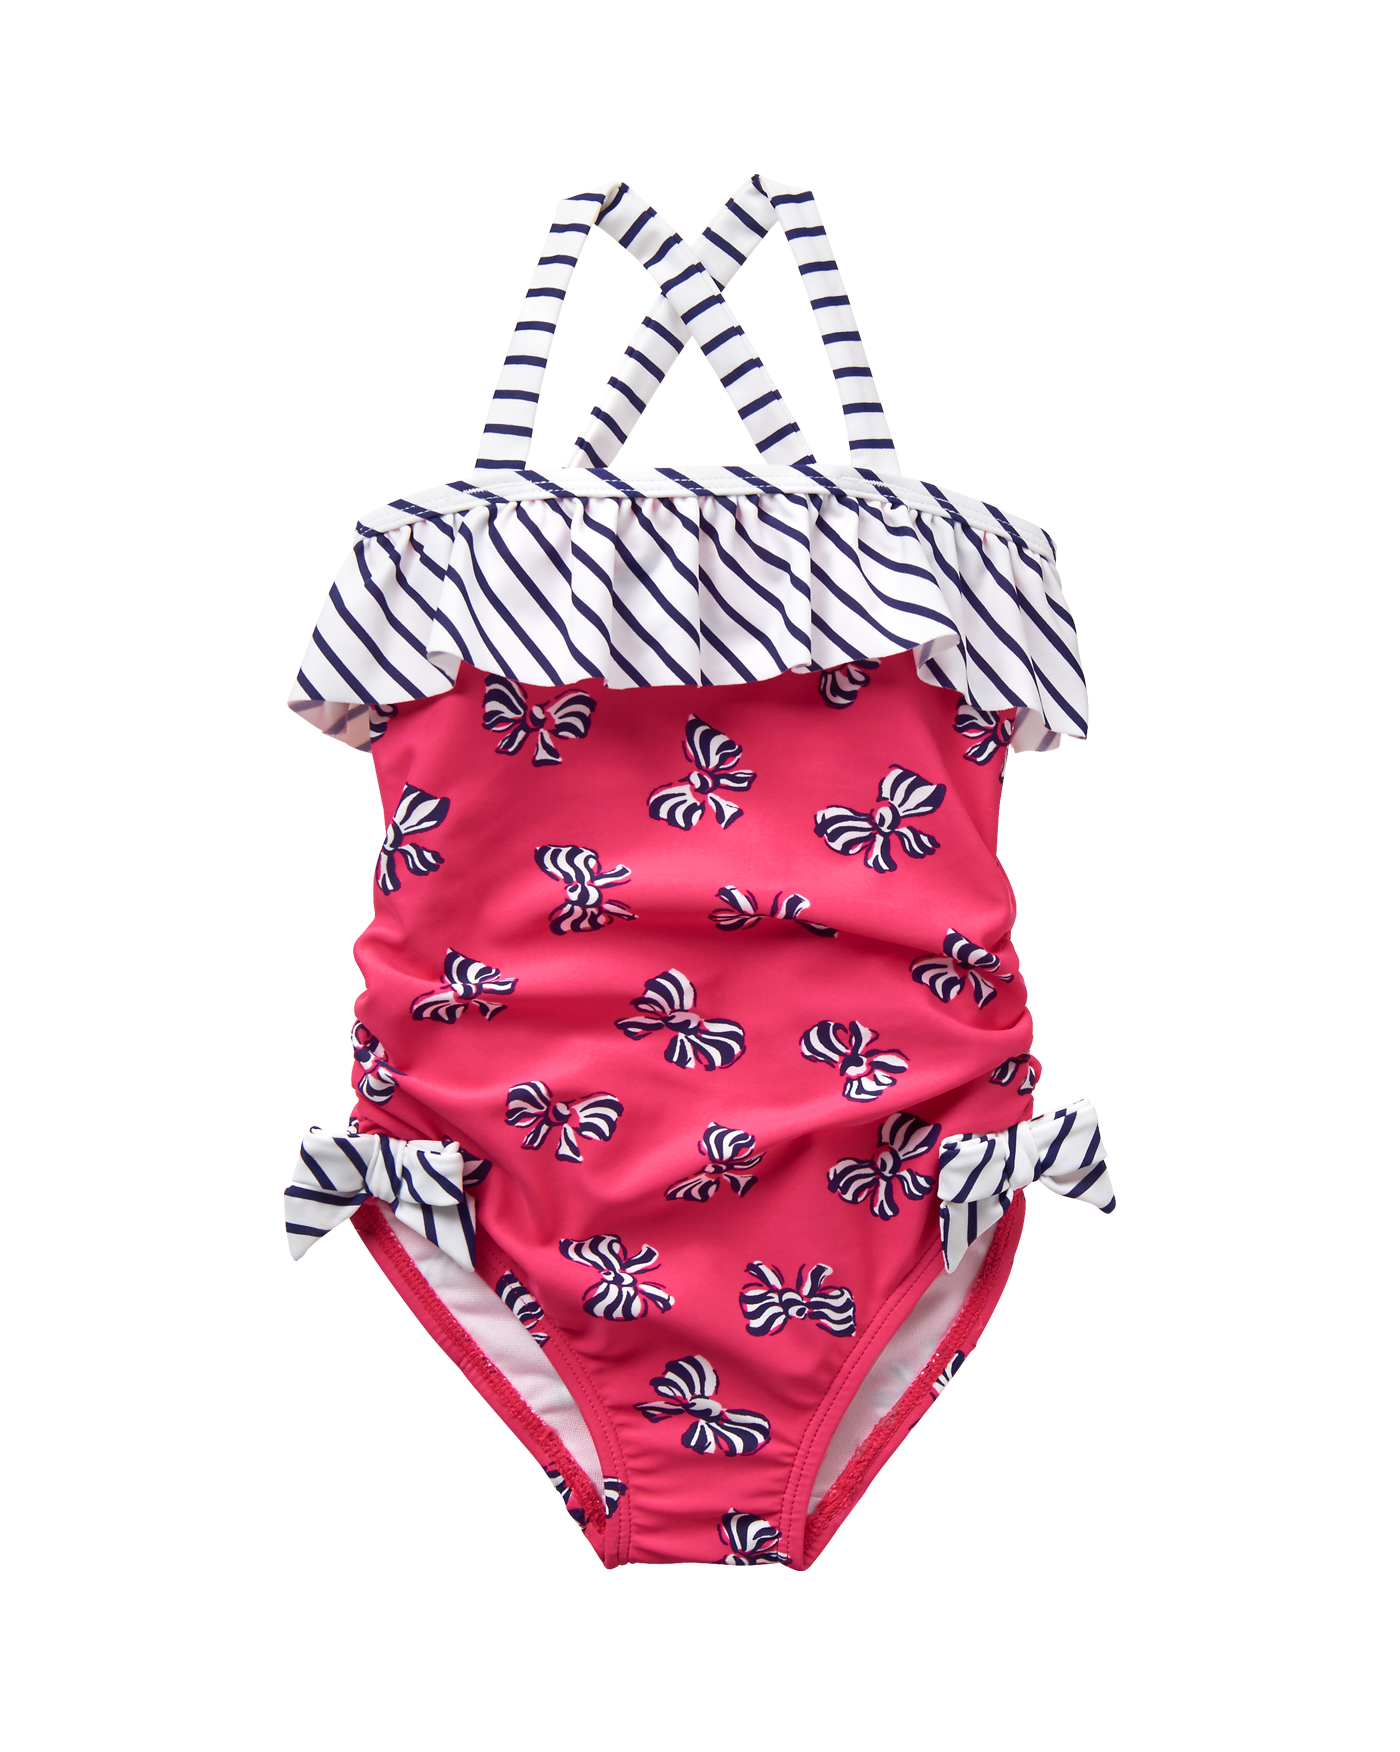 Bow Print Swimsuit image number 0